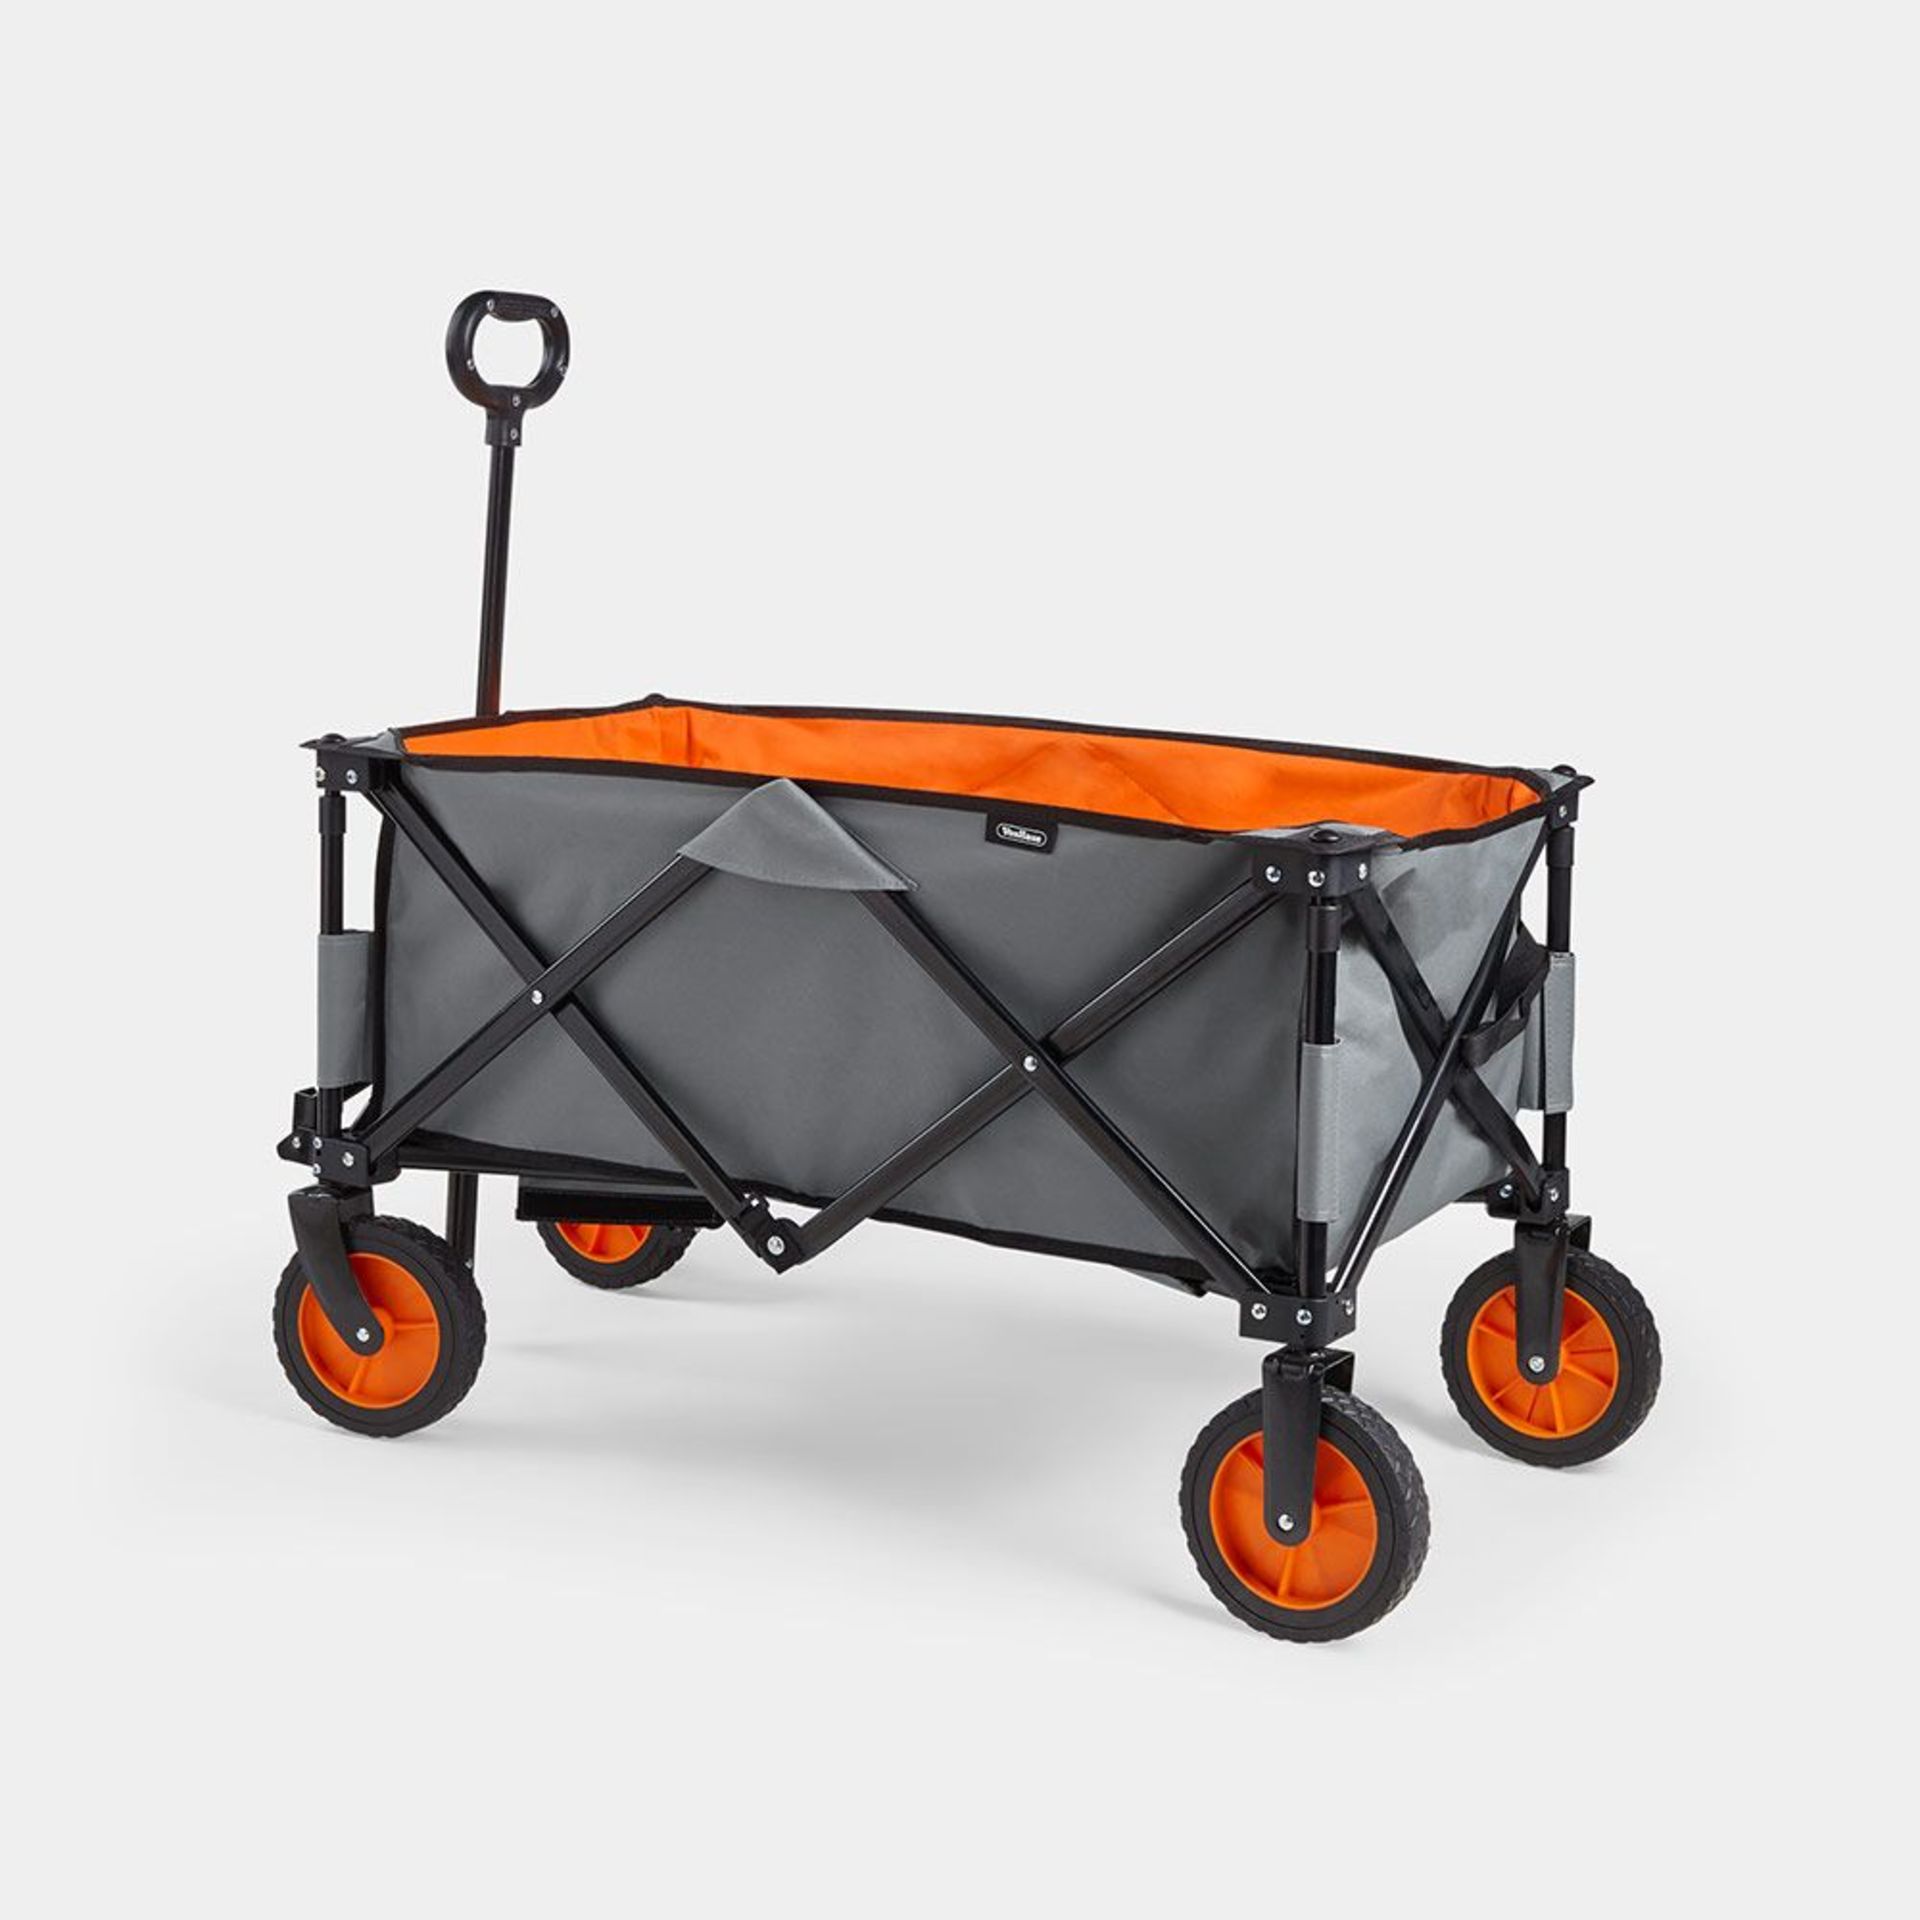 Folding Cart. - BI. Whether you’re going to a festival or on a camping trip, say goodbye to enduring